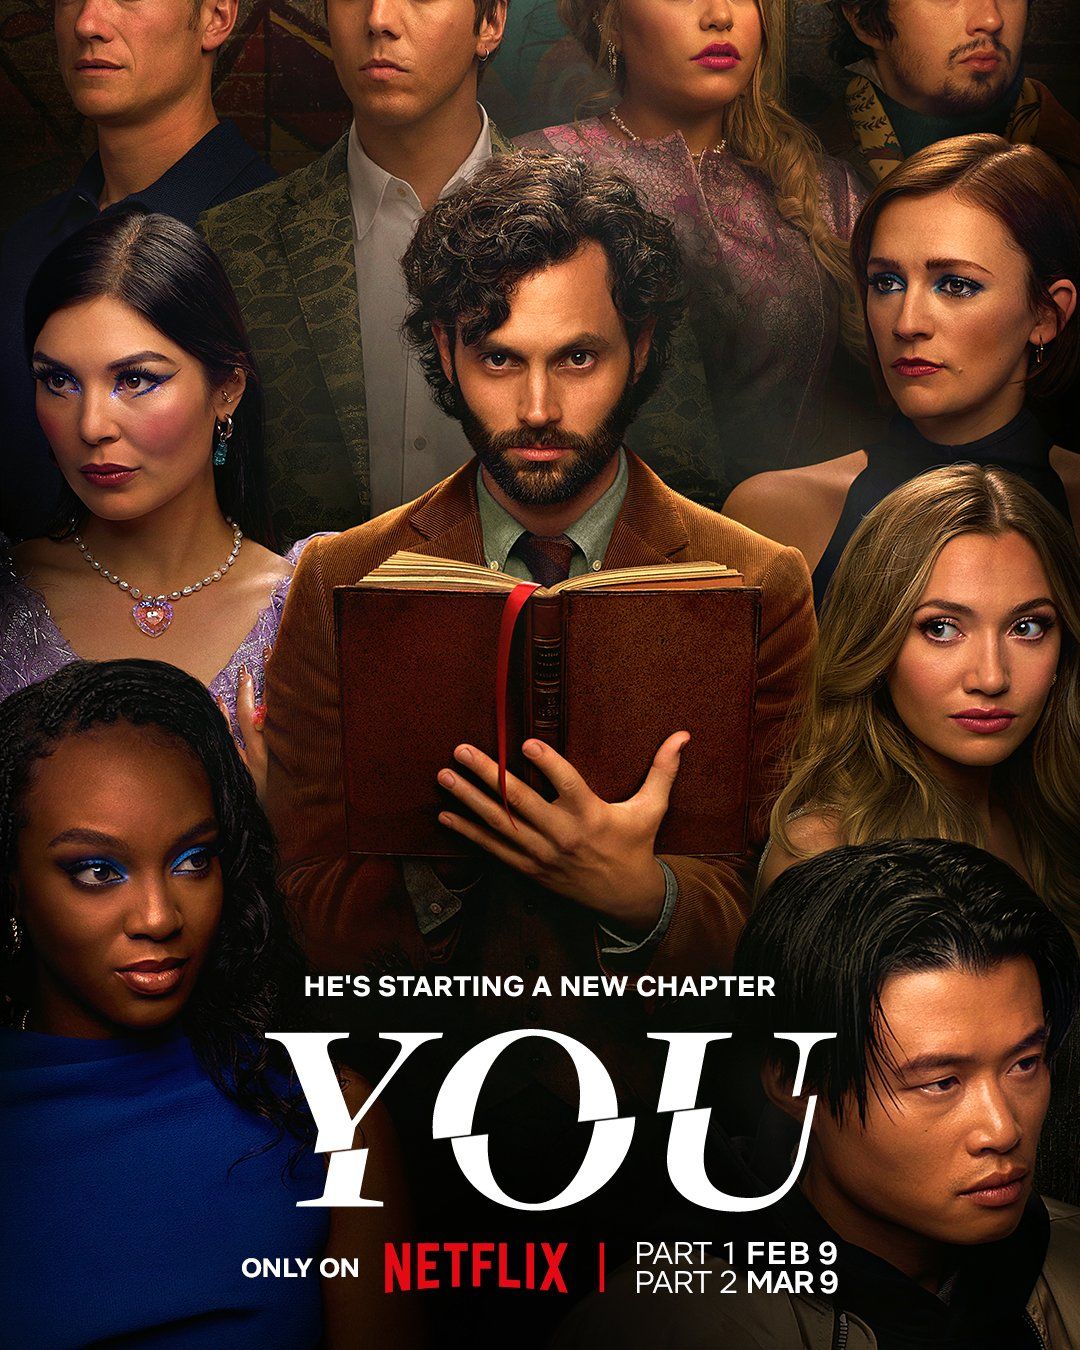 You poster